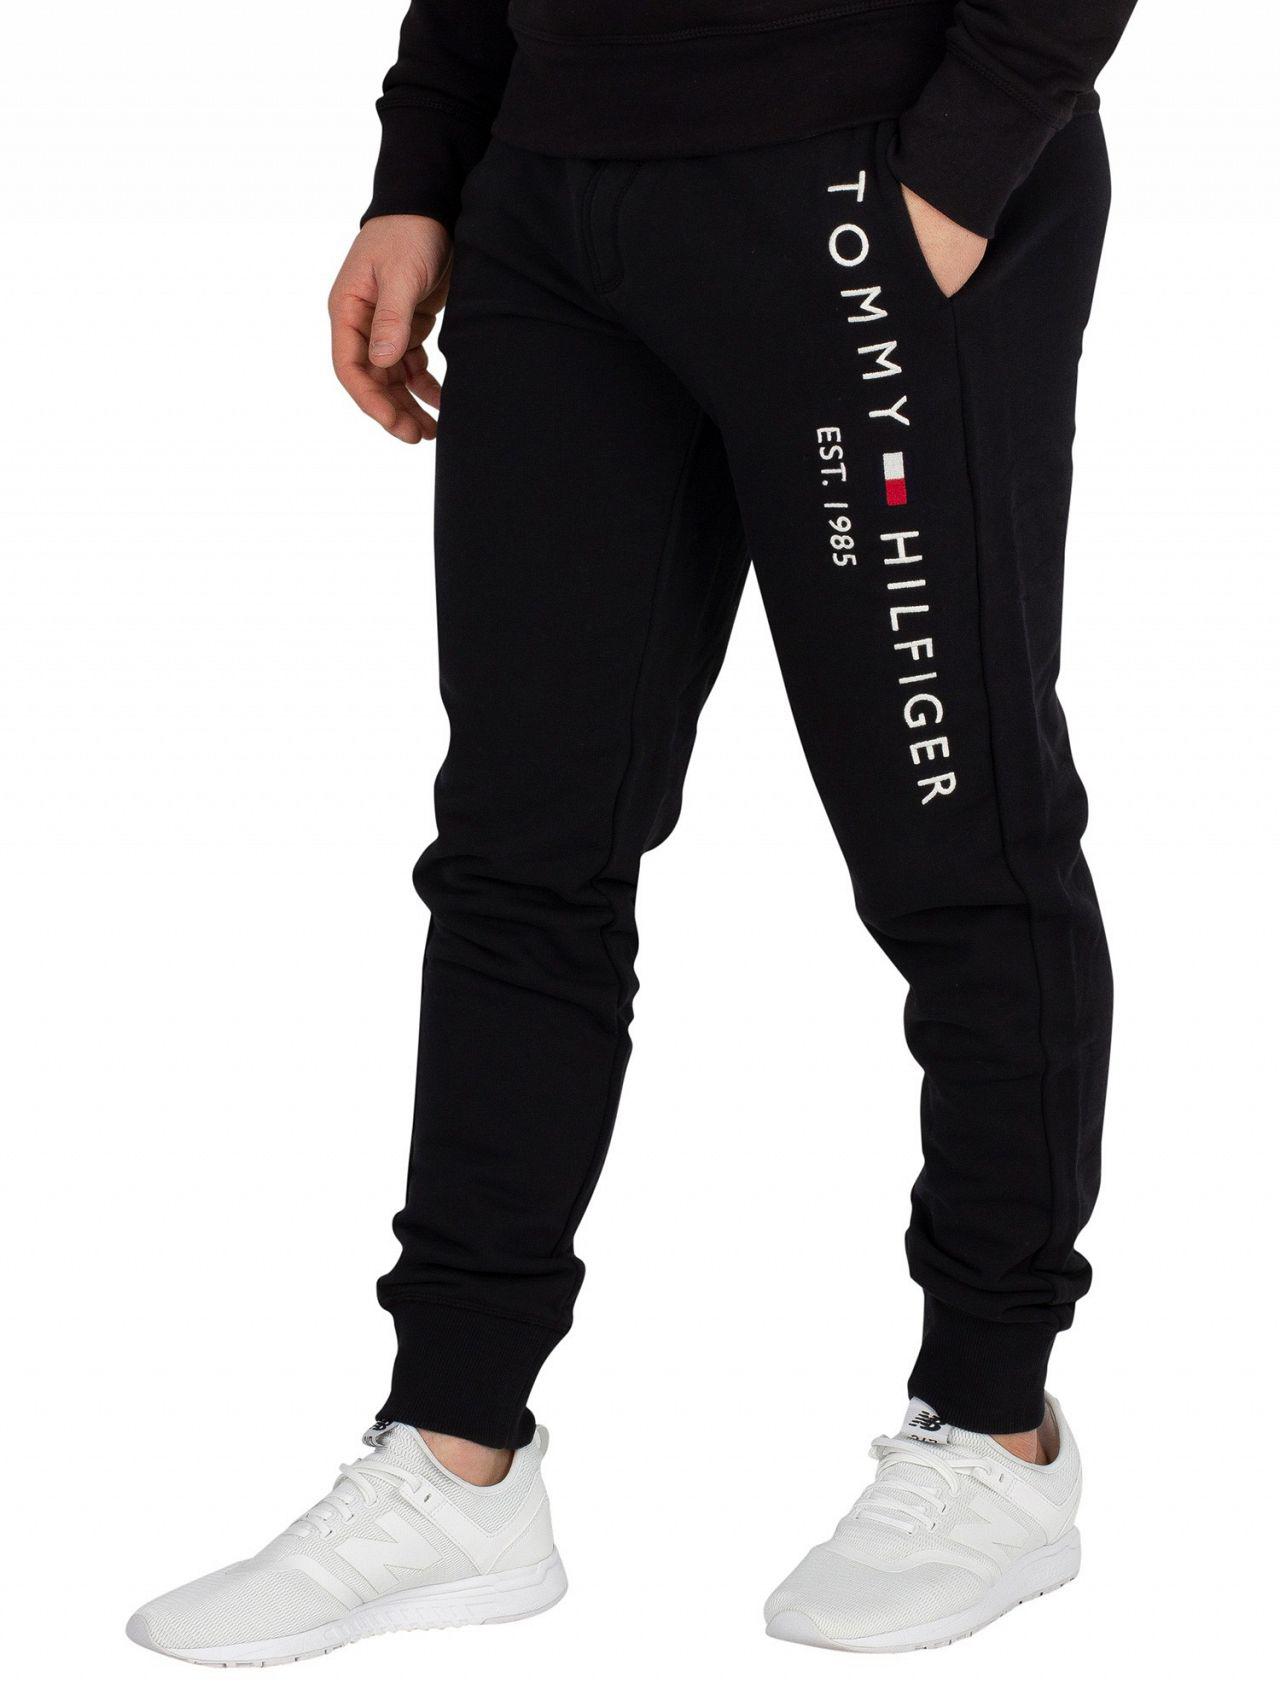 Black Tommy Hilfiger Joggers Best Sale, 53% OFF | www.smokymountains.org